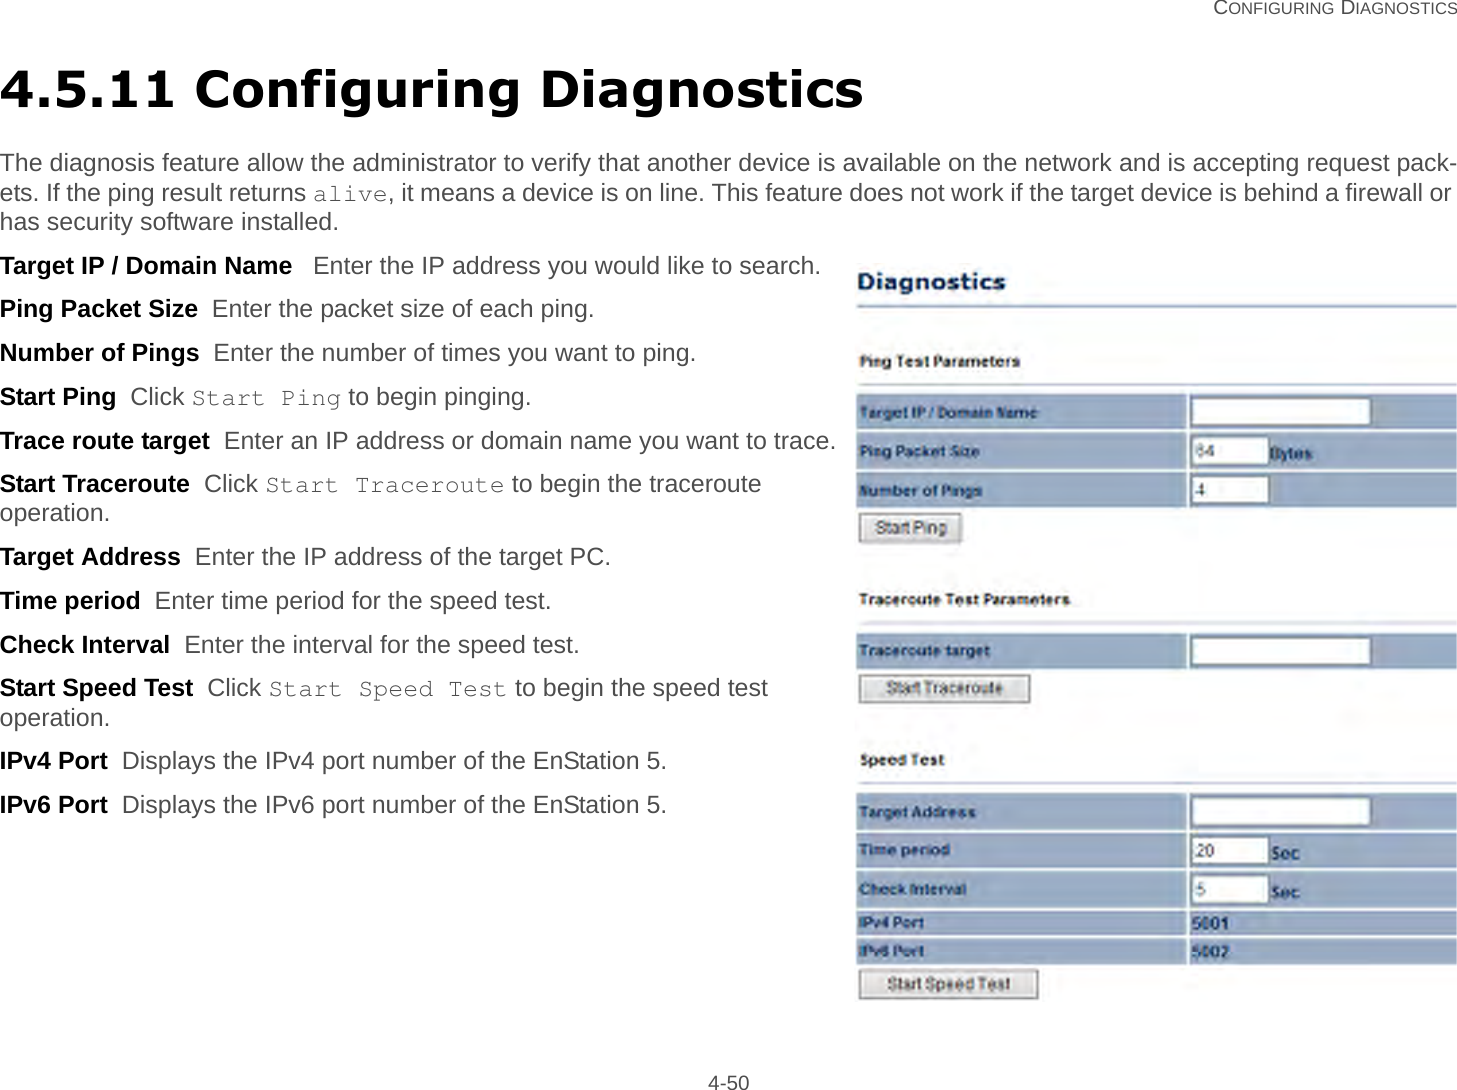   CONFIGURING DIAGNOSTICS 4-504.5.11 Configuring DiagnosticsThe diagnosis feature allow the administrator to verify that another device is available on the network and is accepting request pack-ets. If the ping result returns alive, it means a device is on line. This feature does not work if the target device is behind a firewall or has security software installed.Target IP / Domain Name   Enter the IP address you would like to search.Ping Packet Size  Enter the packet size of each ping.Number of Pings  Enter the number of times you want to ping.Start Ping  Click Start Ping to begin pinging.Trace route target  Enter an IP address or domain name you want to trace.Start Traceroute  Click Start Traceroute to begin the traceroute operation.Target Address  Enter the IP address of the target PC.Time period  Enter time period for the speed test.Check Interval  Enter the interval for the speed test.Start Speed Test  Click Start Speed Test to begin the speed test operation.IPv4 Port  Displays the IPv4 port number of the EnStation 5.IPv6 Port  Displays the IPv6 port number of the EnStation 5.